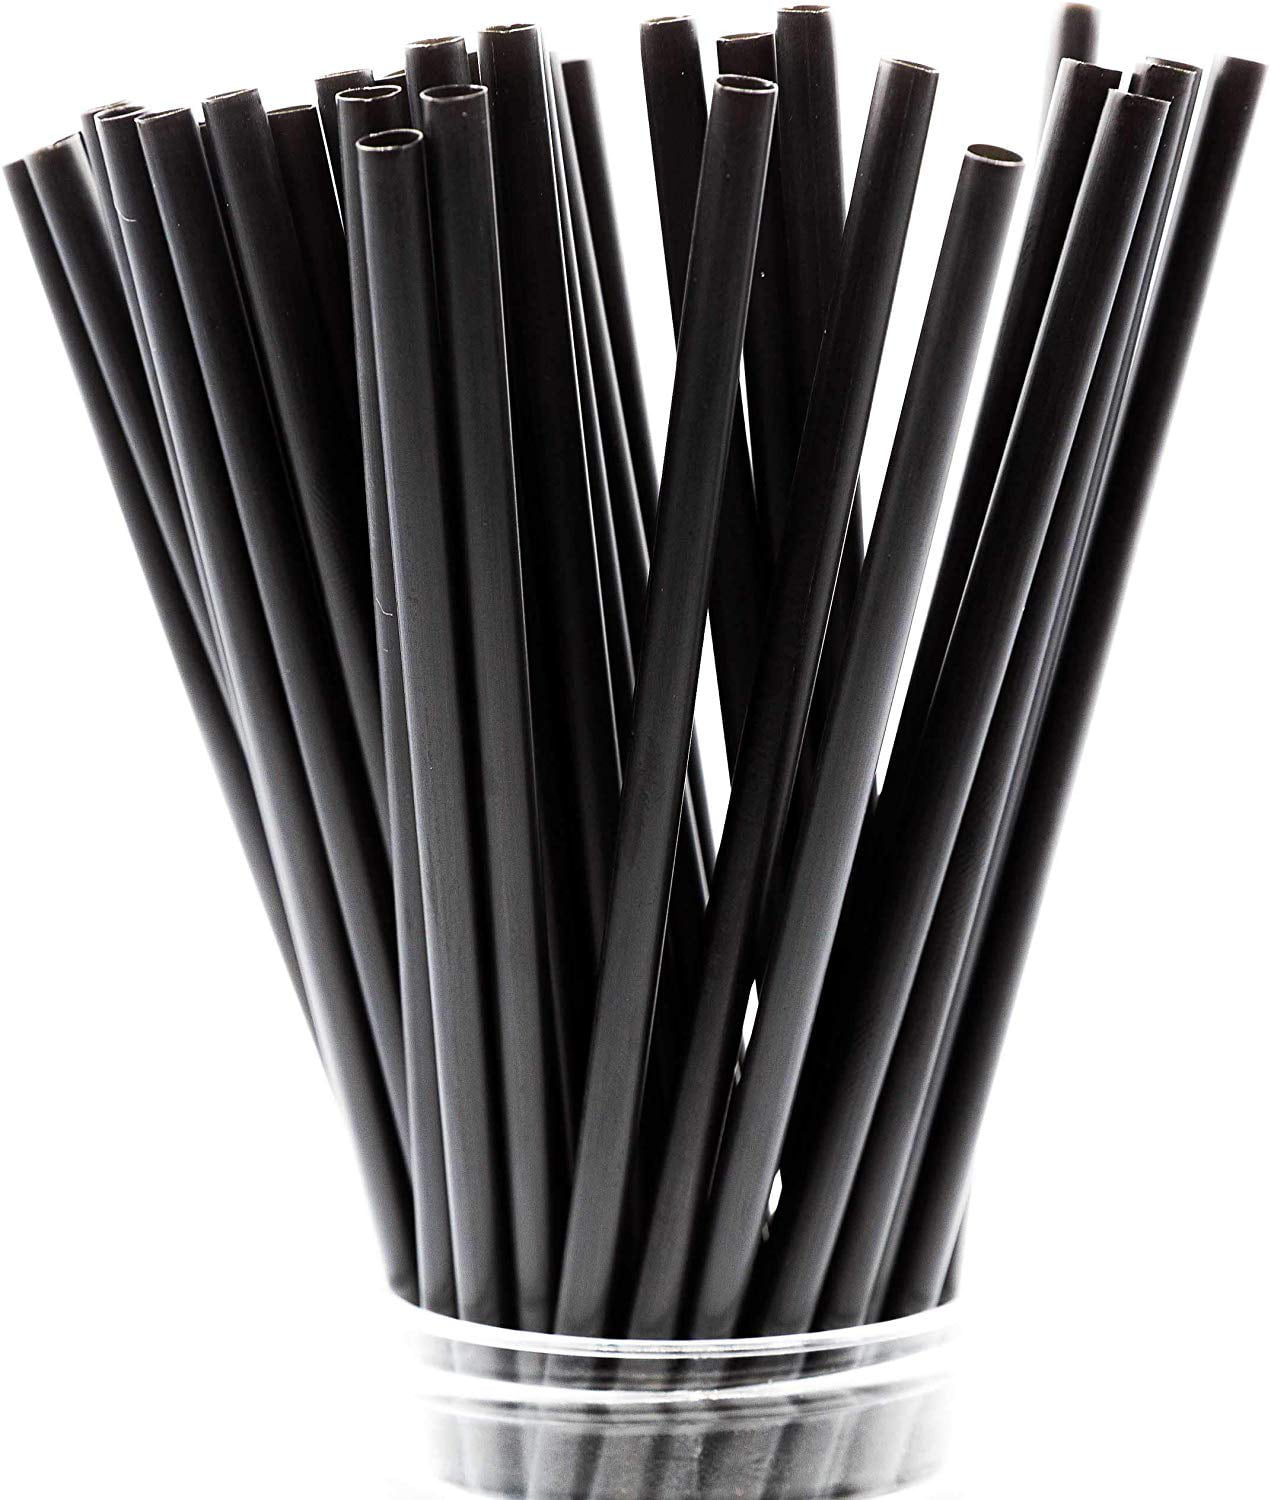 Assorted Colors 10 Inch Drinking Straws 250 Straws 10 Inch x 0.28 Inch 